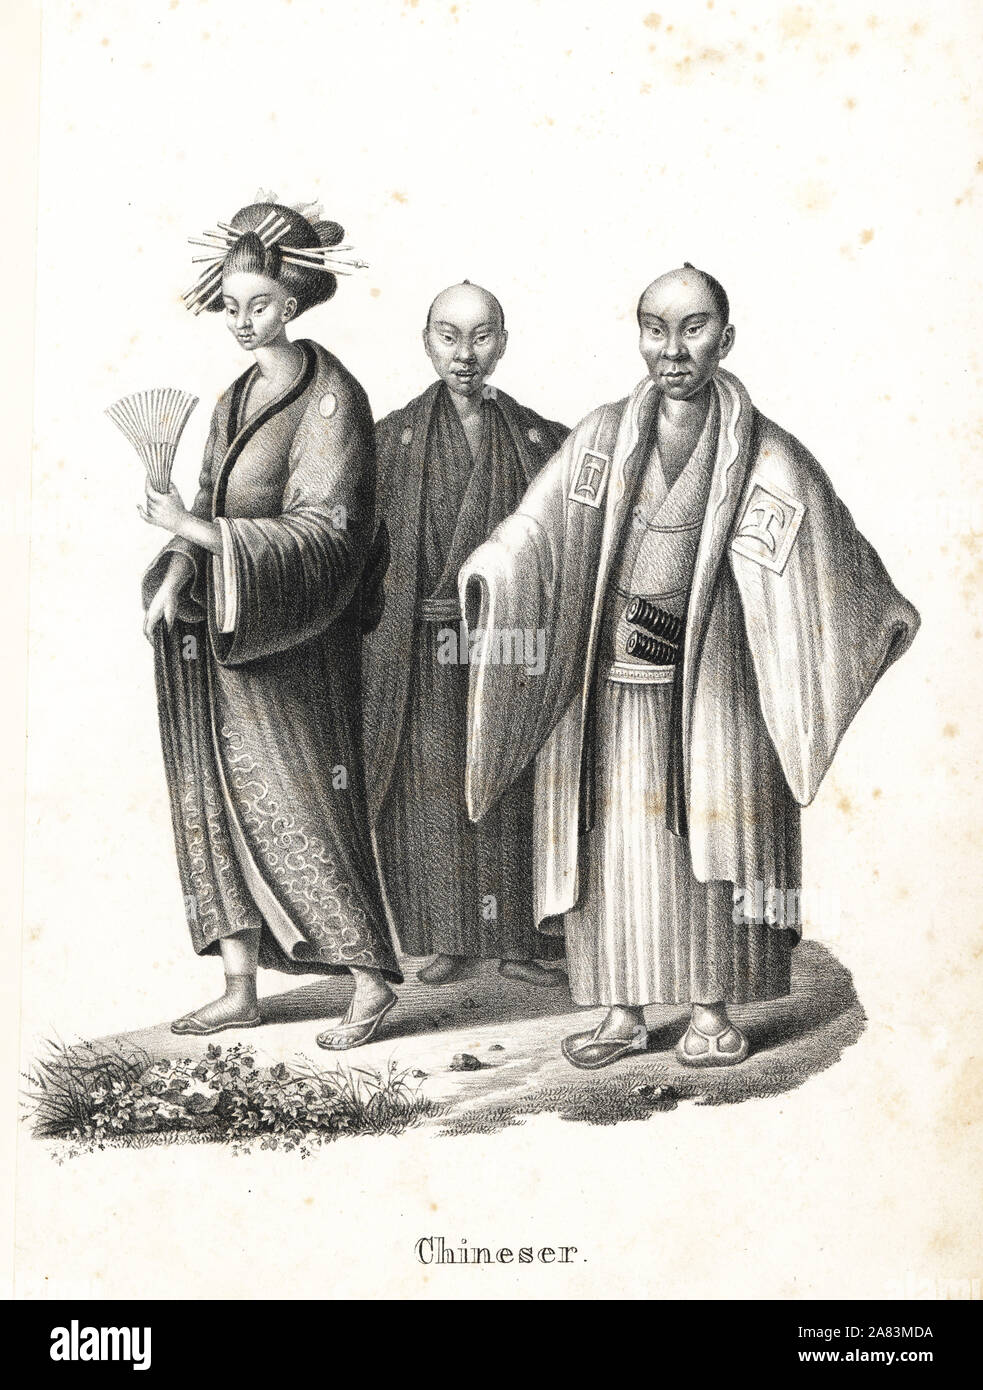 Japanese oiran and samurai. Japanese courtesan in kimono with fan and hair ornaments, and two Japanese samurai in chonmage hairstyle wearing montsuki over hakama with two swords (katana) in their belts. (Titled Chinese in error.) Lithograph by Karl Joseph Brodtmann from Heinrich Rudolf Schinz's Illustrated Natural History of Men and Animals, 1836. Stock Photo